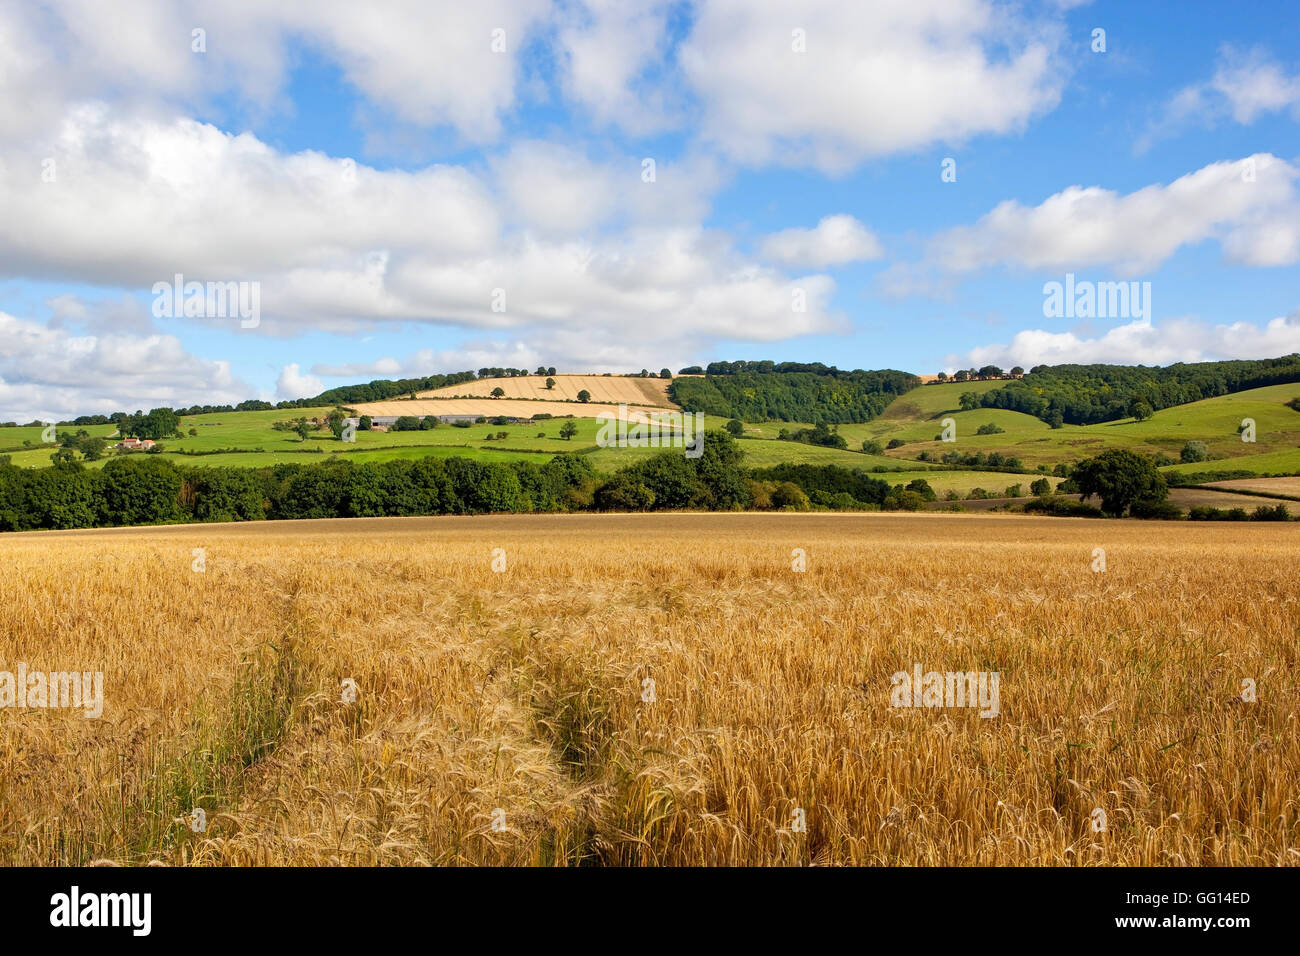 Golden barley crops in the scenic Yorkshire wolds under a blue cloudy sky in summertime. Stock Photo